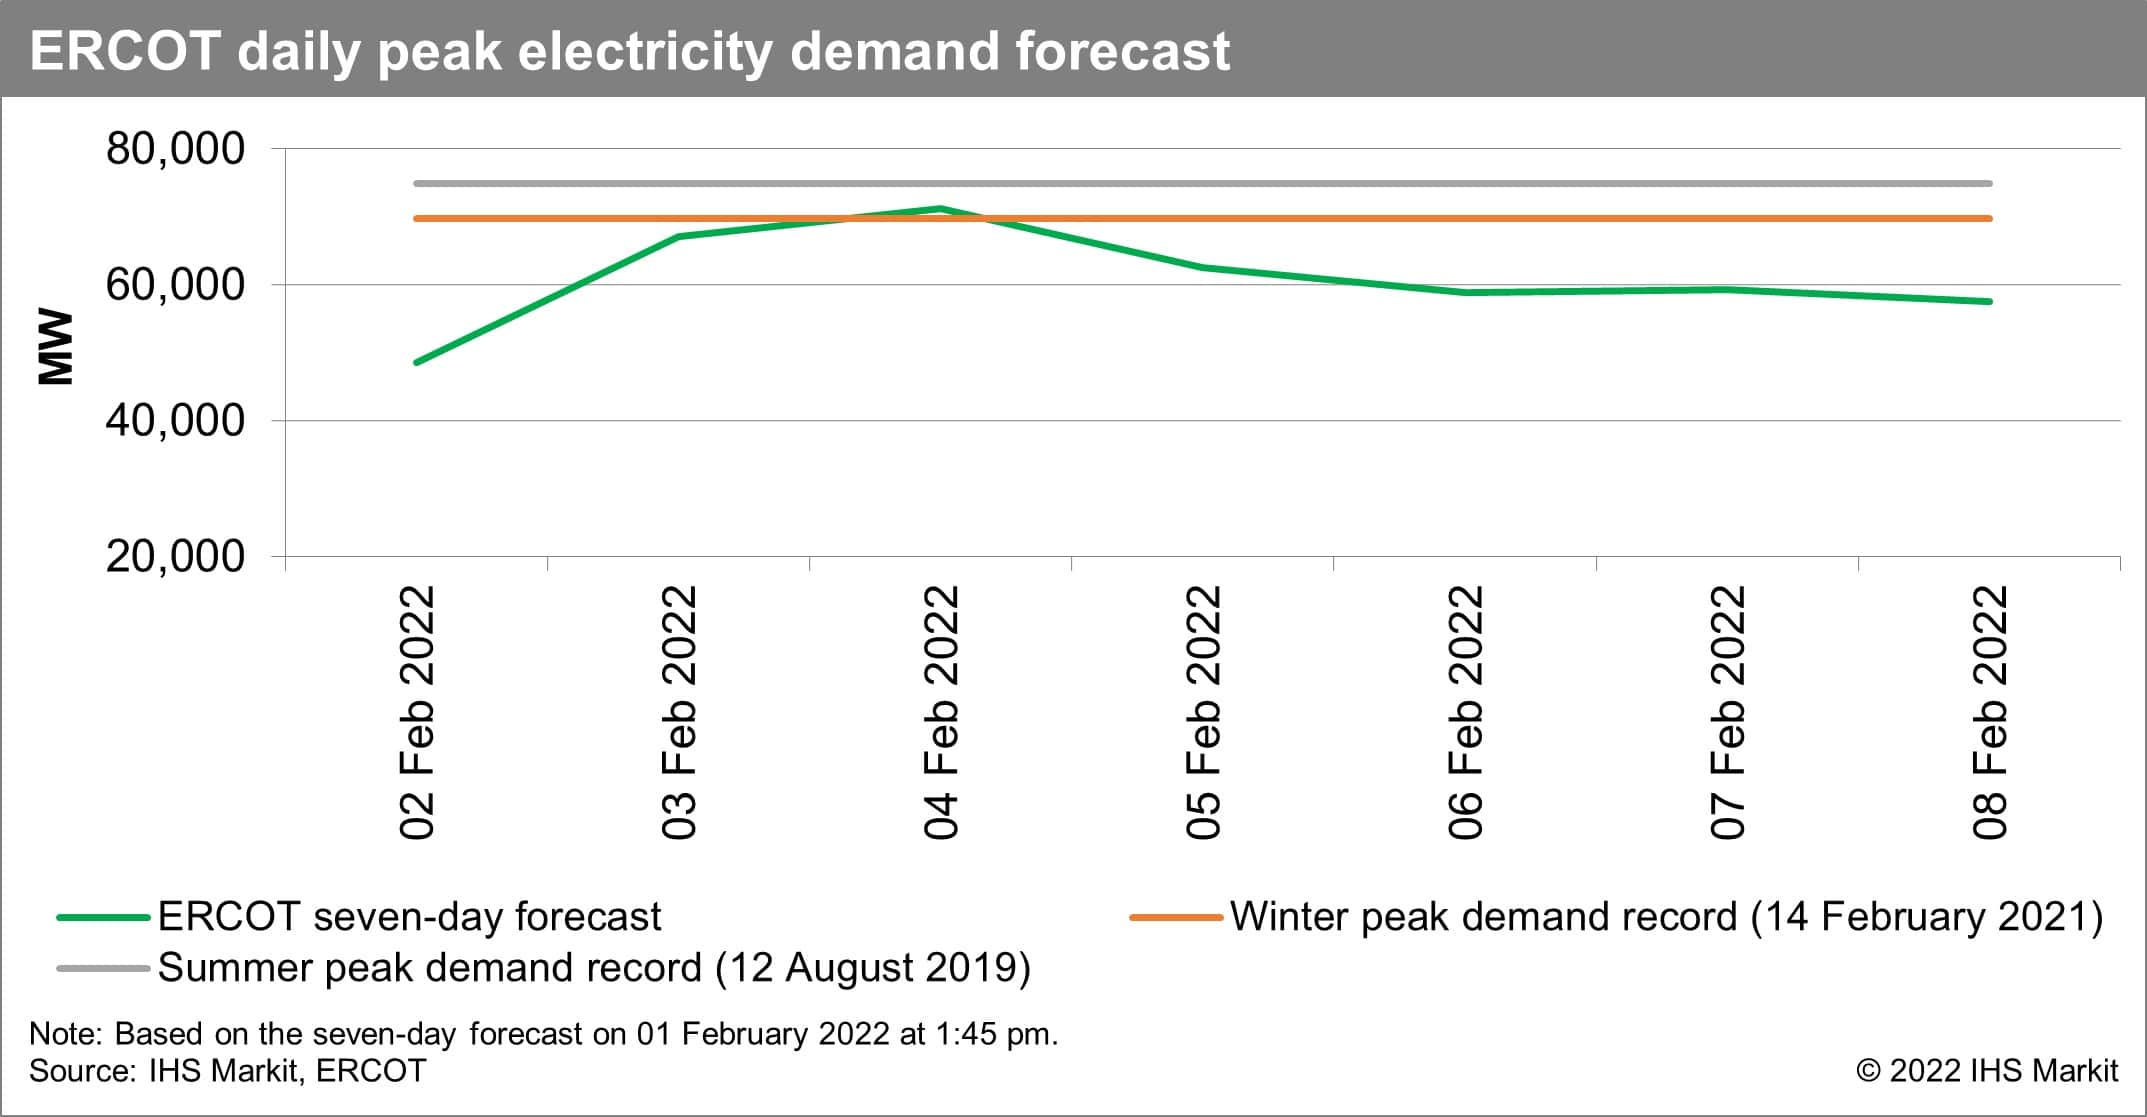 ERCOT daily peak electricity demand forecast